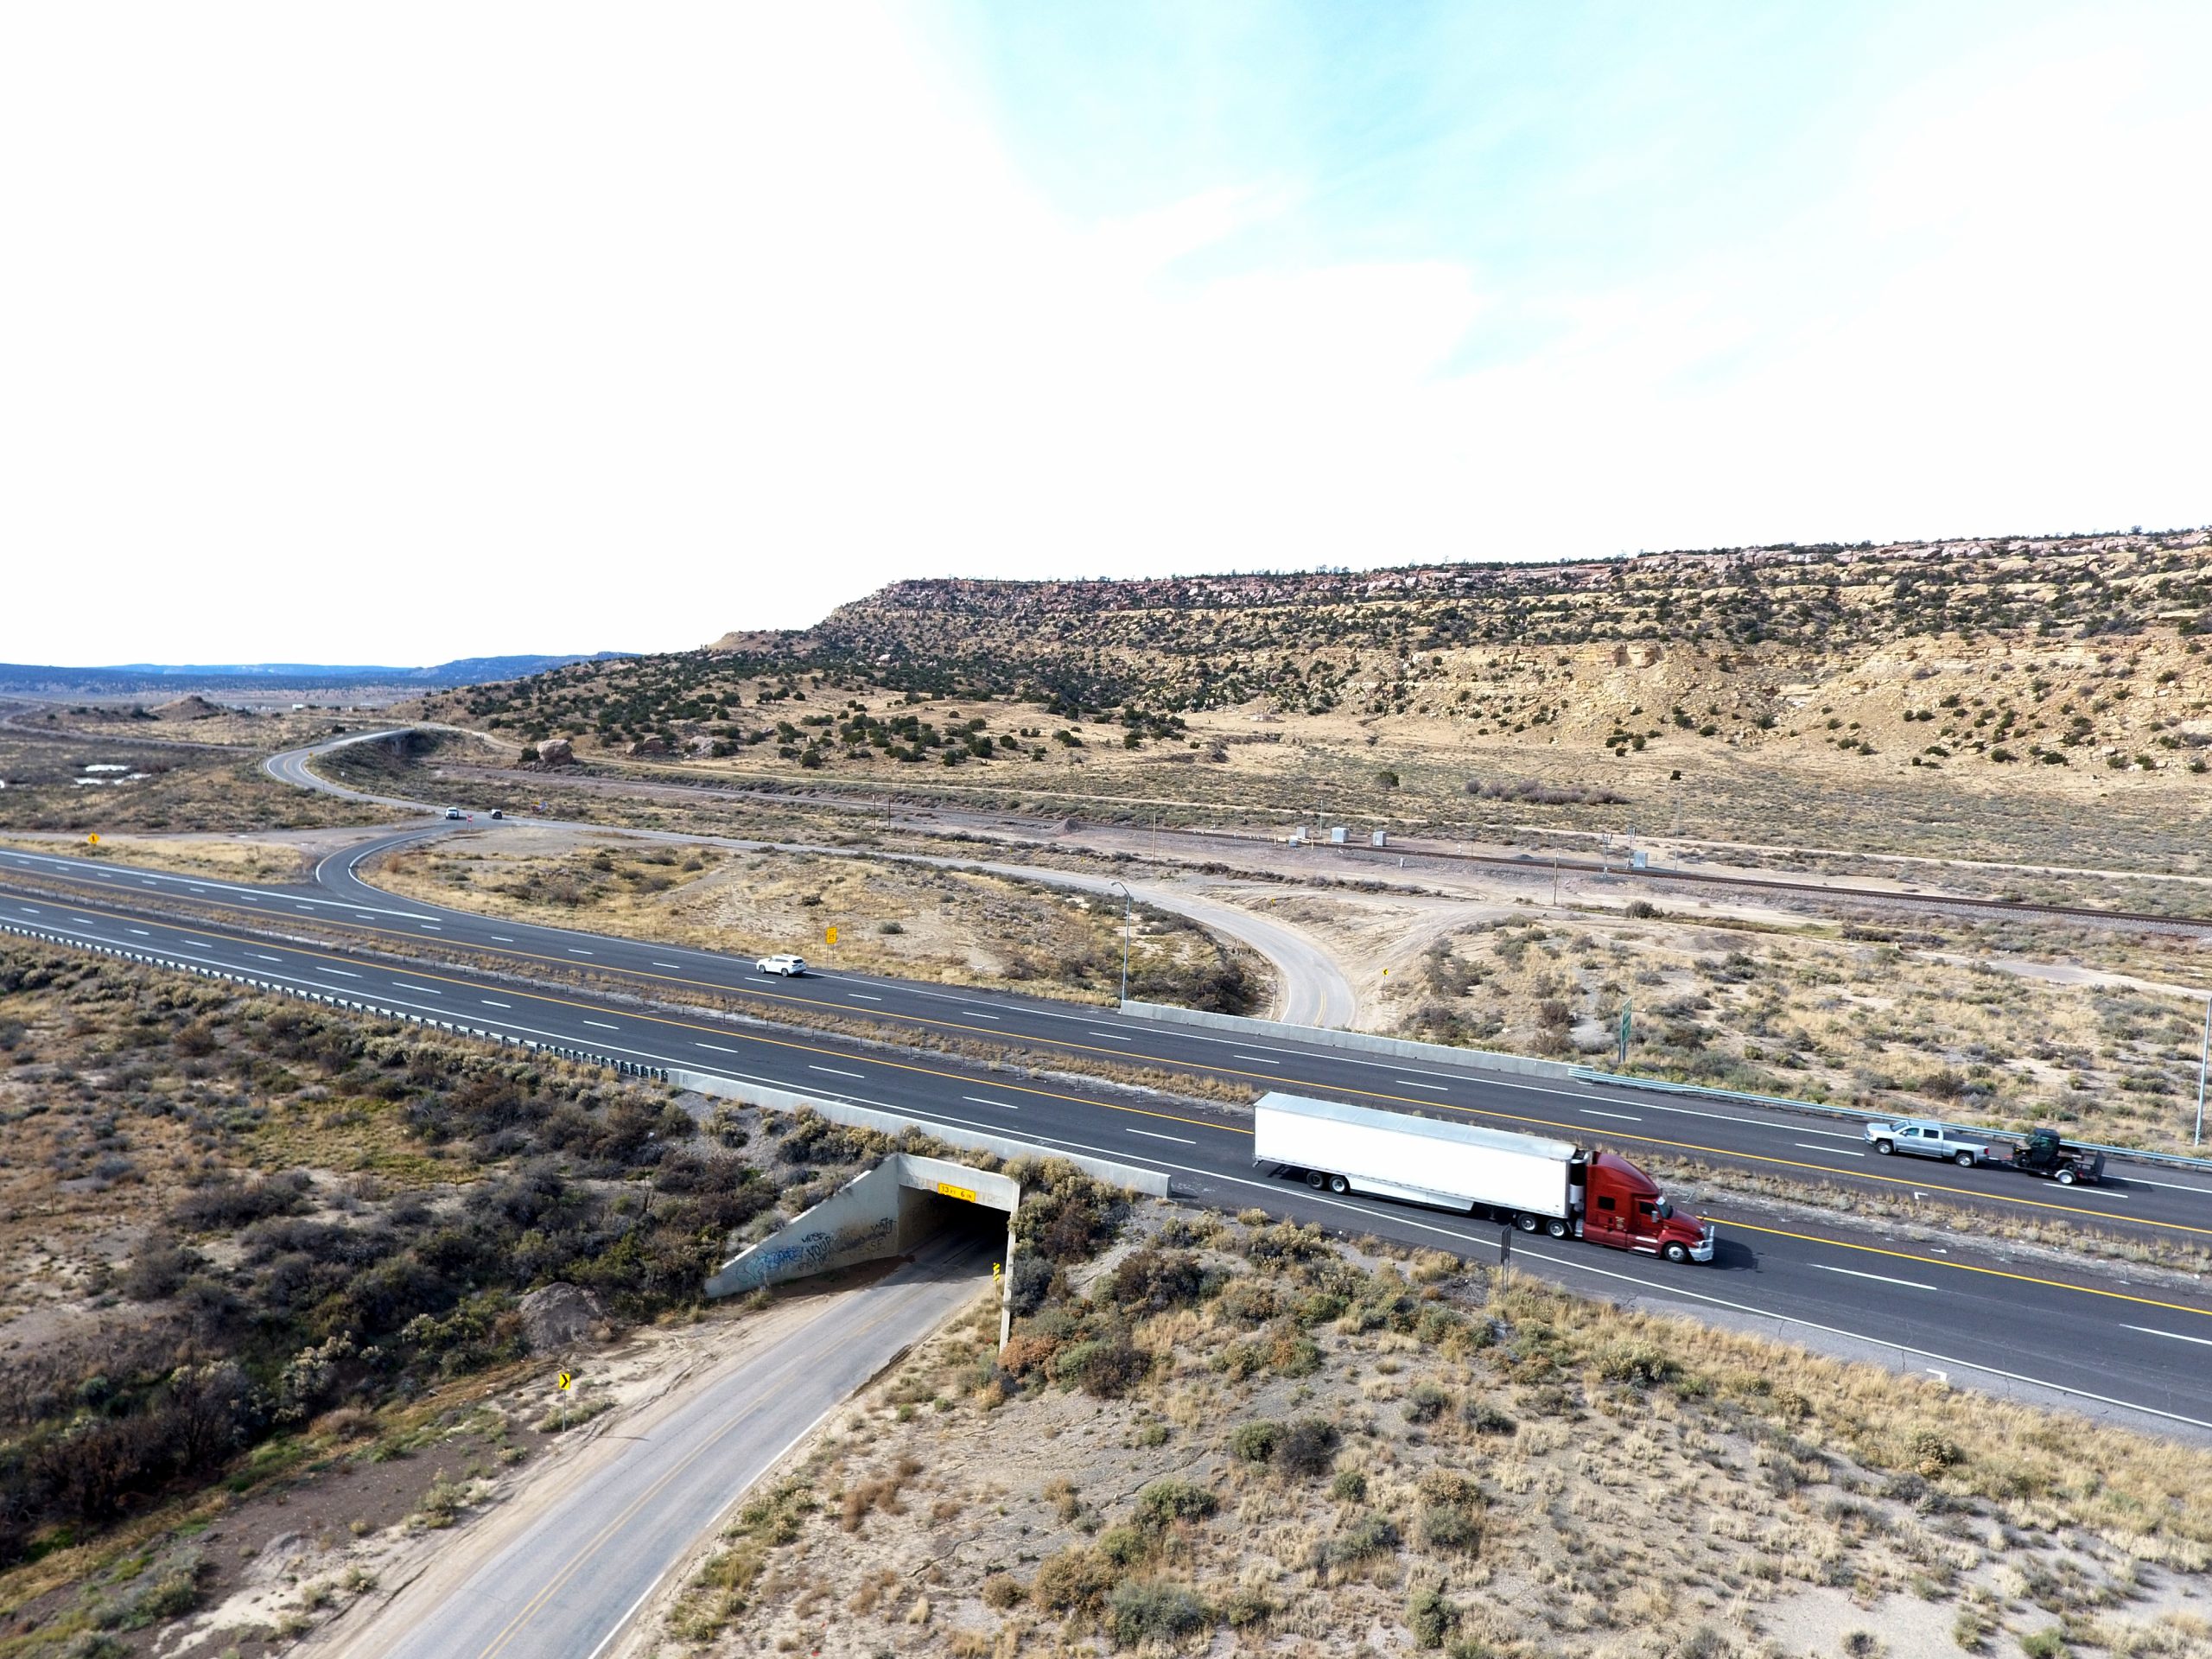 Aerial view looking NW from NM 118 at the I-40 interchange.